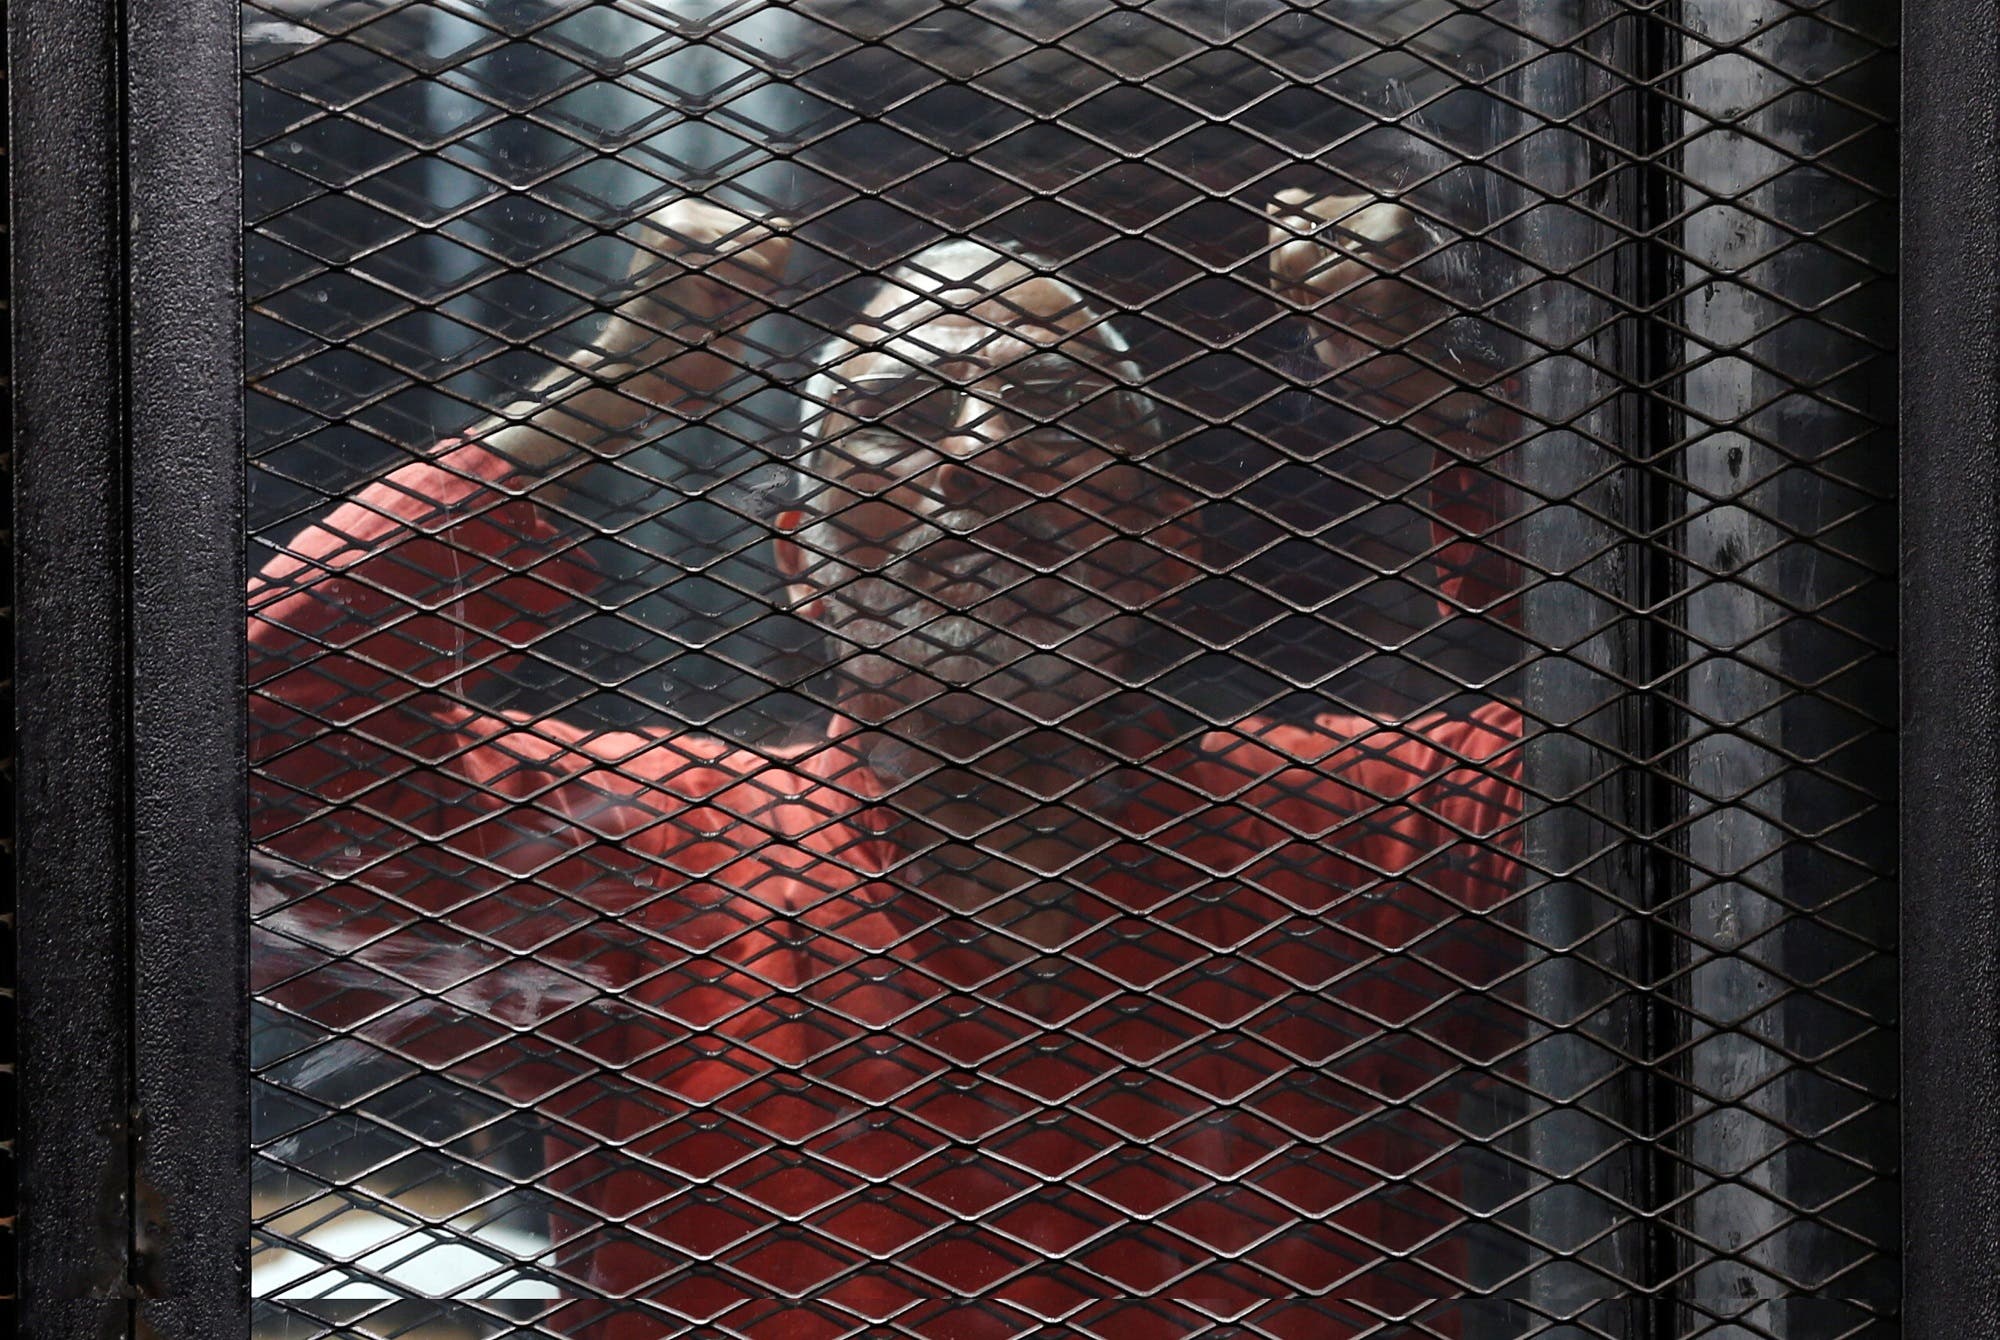 Muslim Brotherhood leader Mohamed Badie shouts solgans behind bars during trial at a court in Cairo on May 31, 2016. (Reuters)